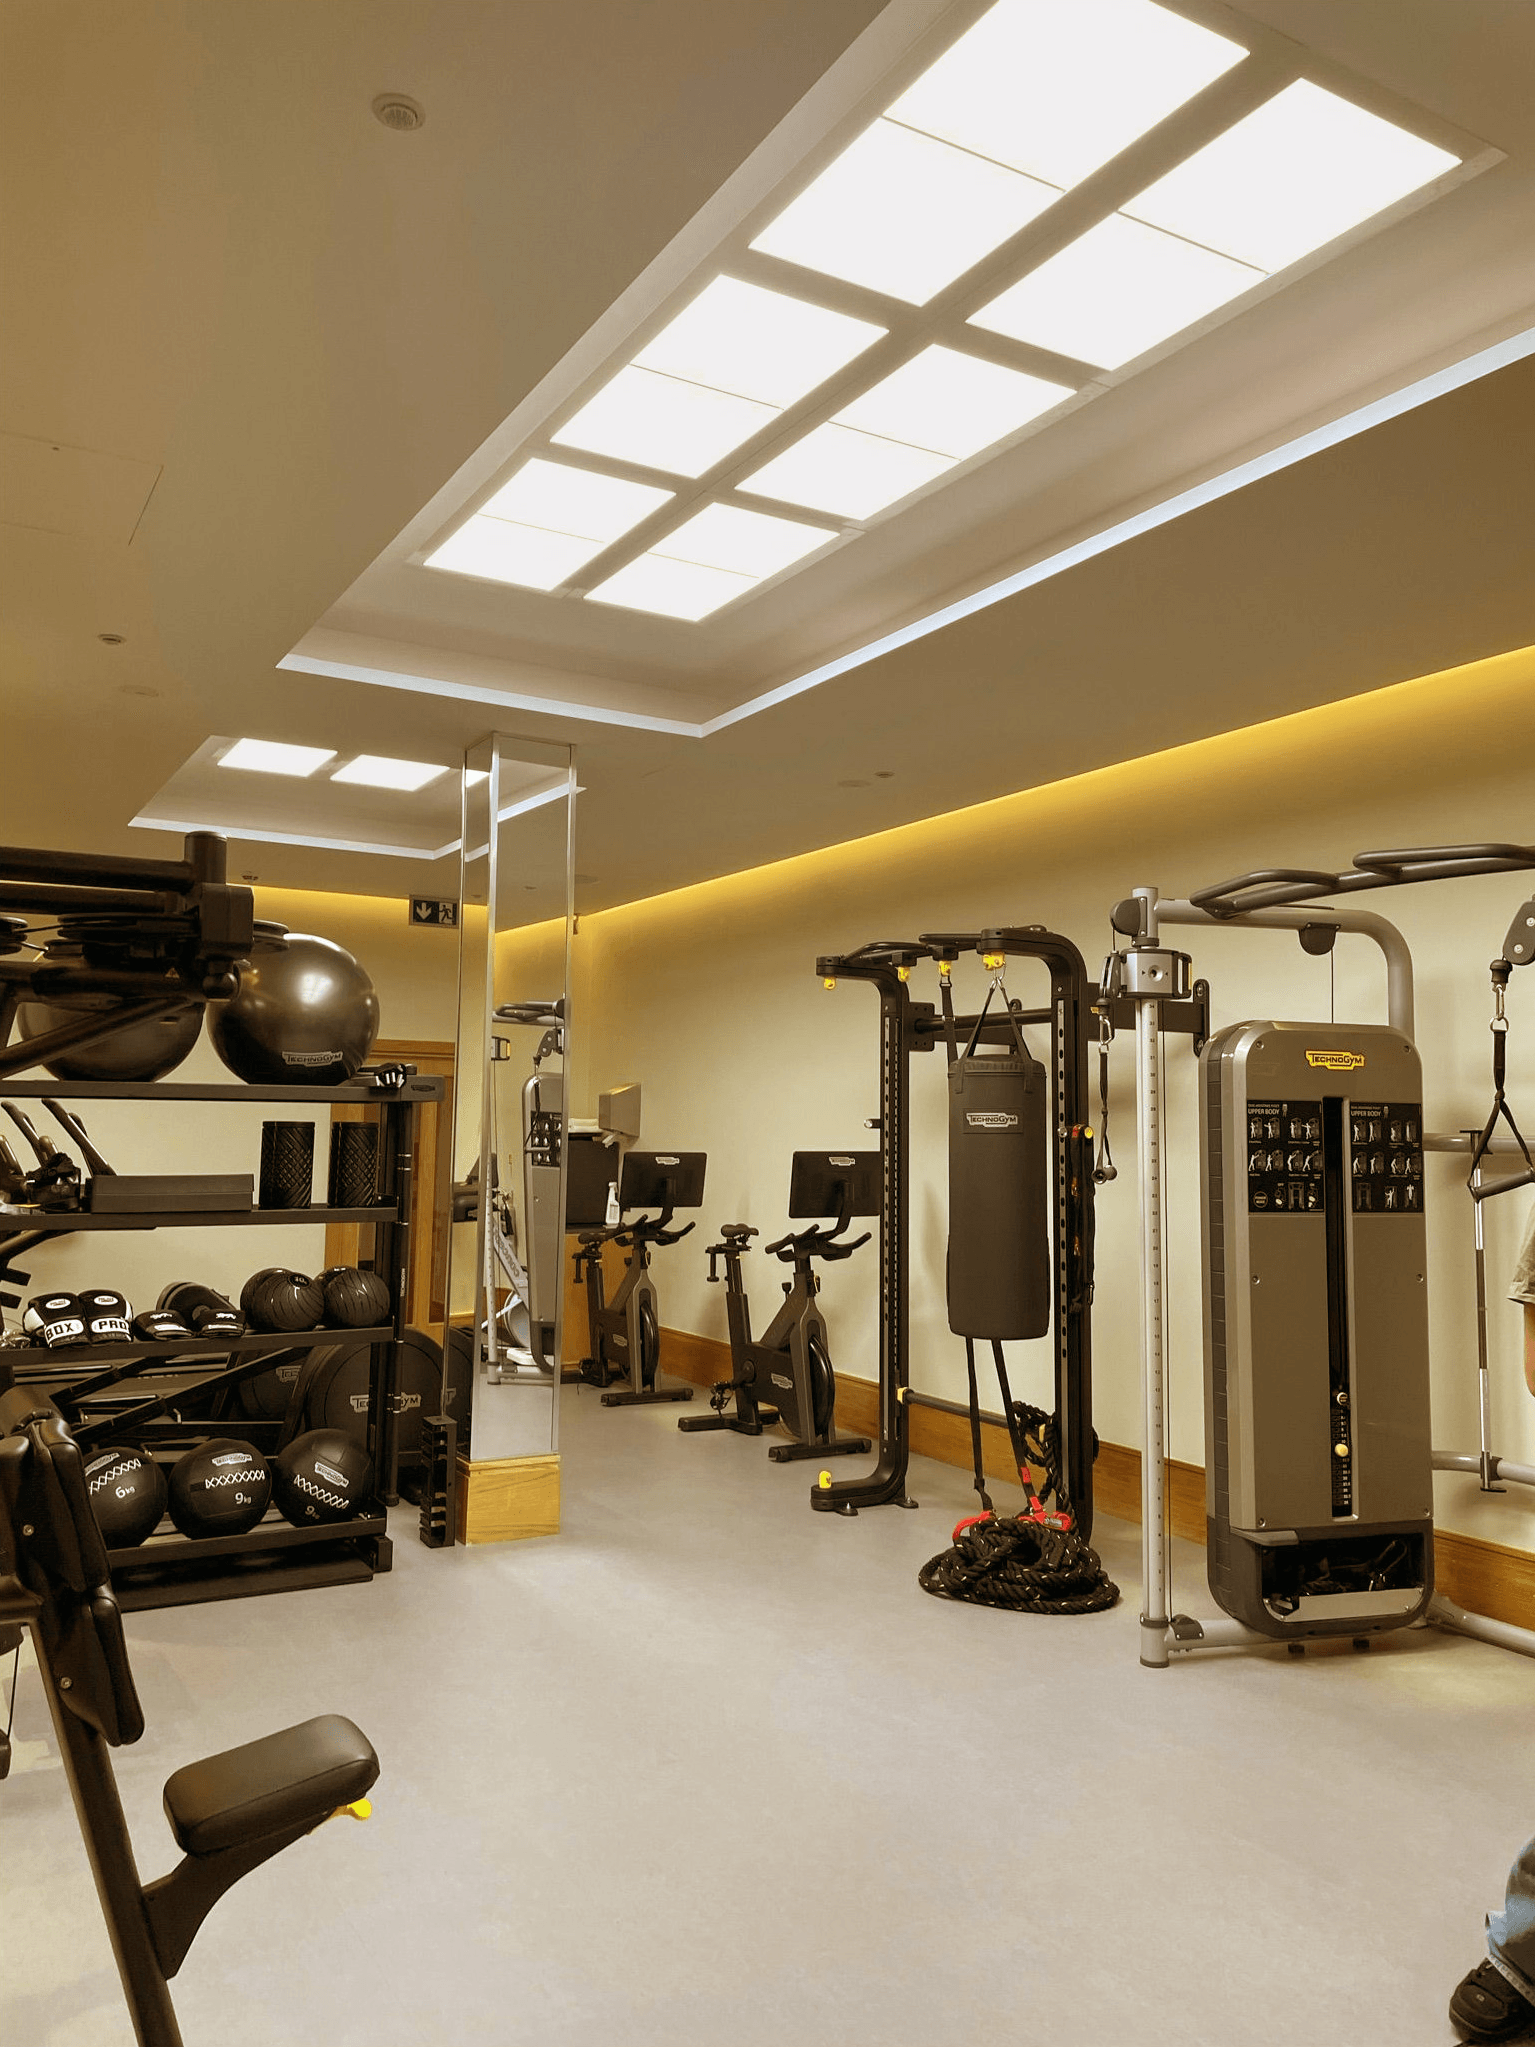 Innerscene installation case study warm lighting above exercise machines at Aman Spa The Connaught Hotel London